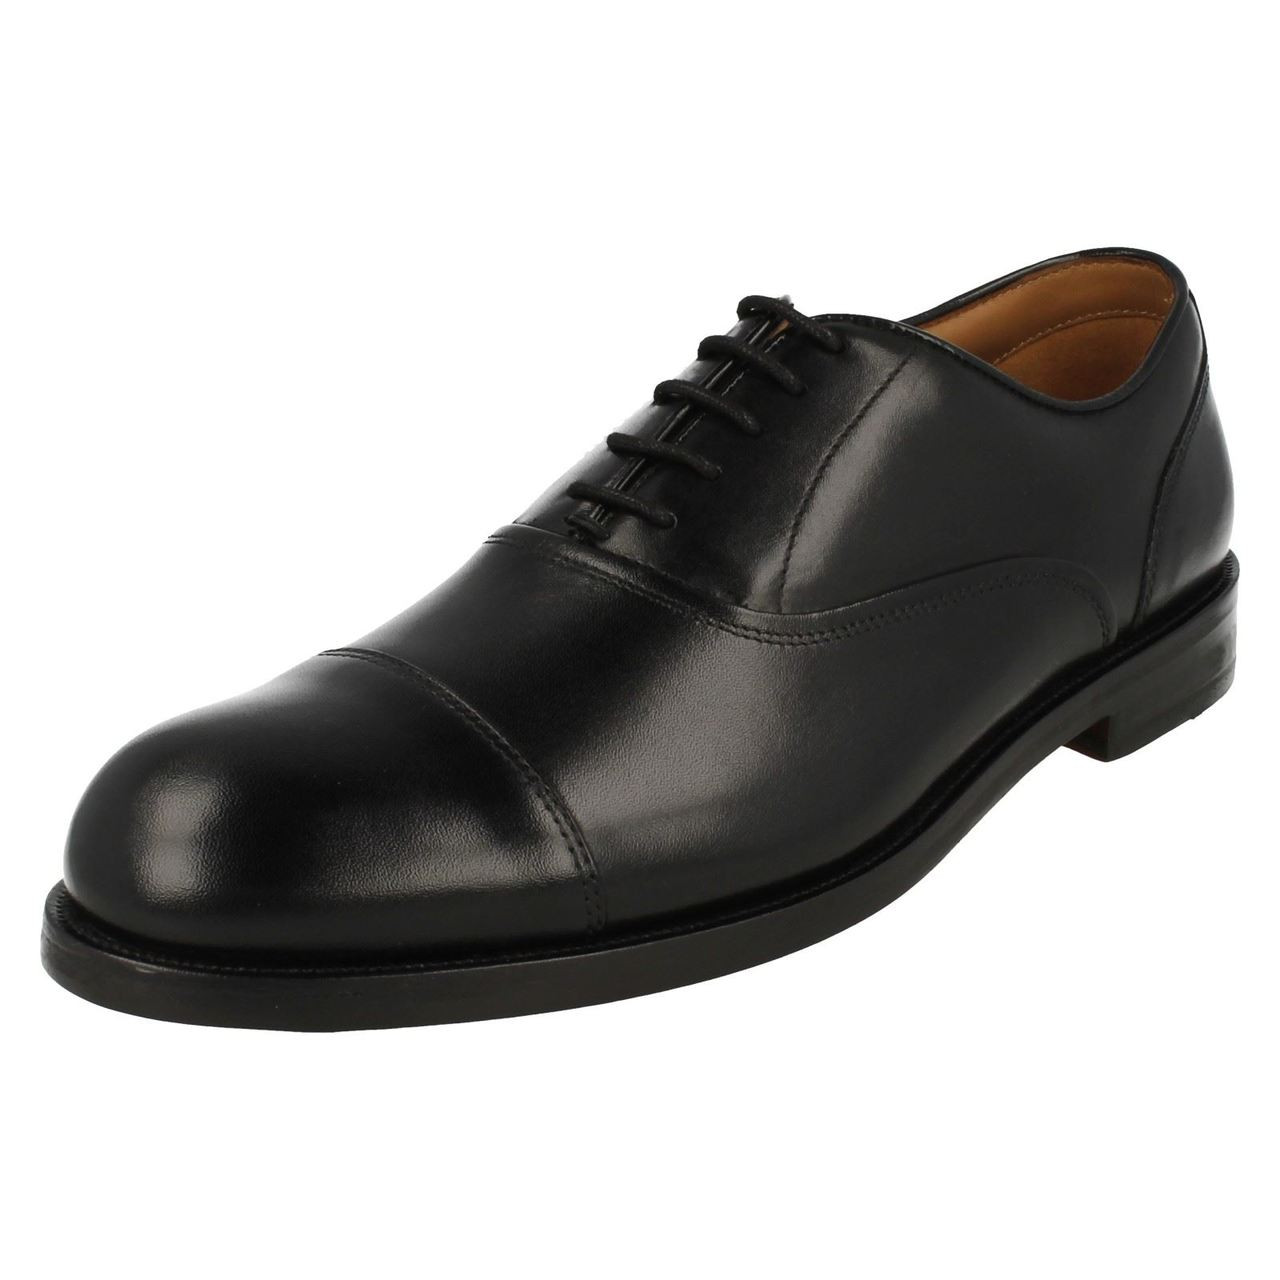 clarks oxford shoes mens